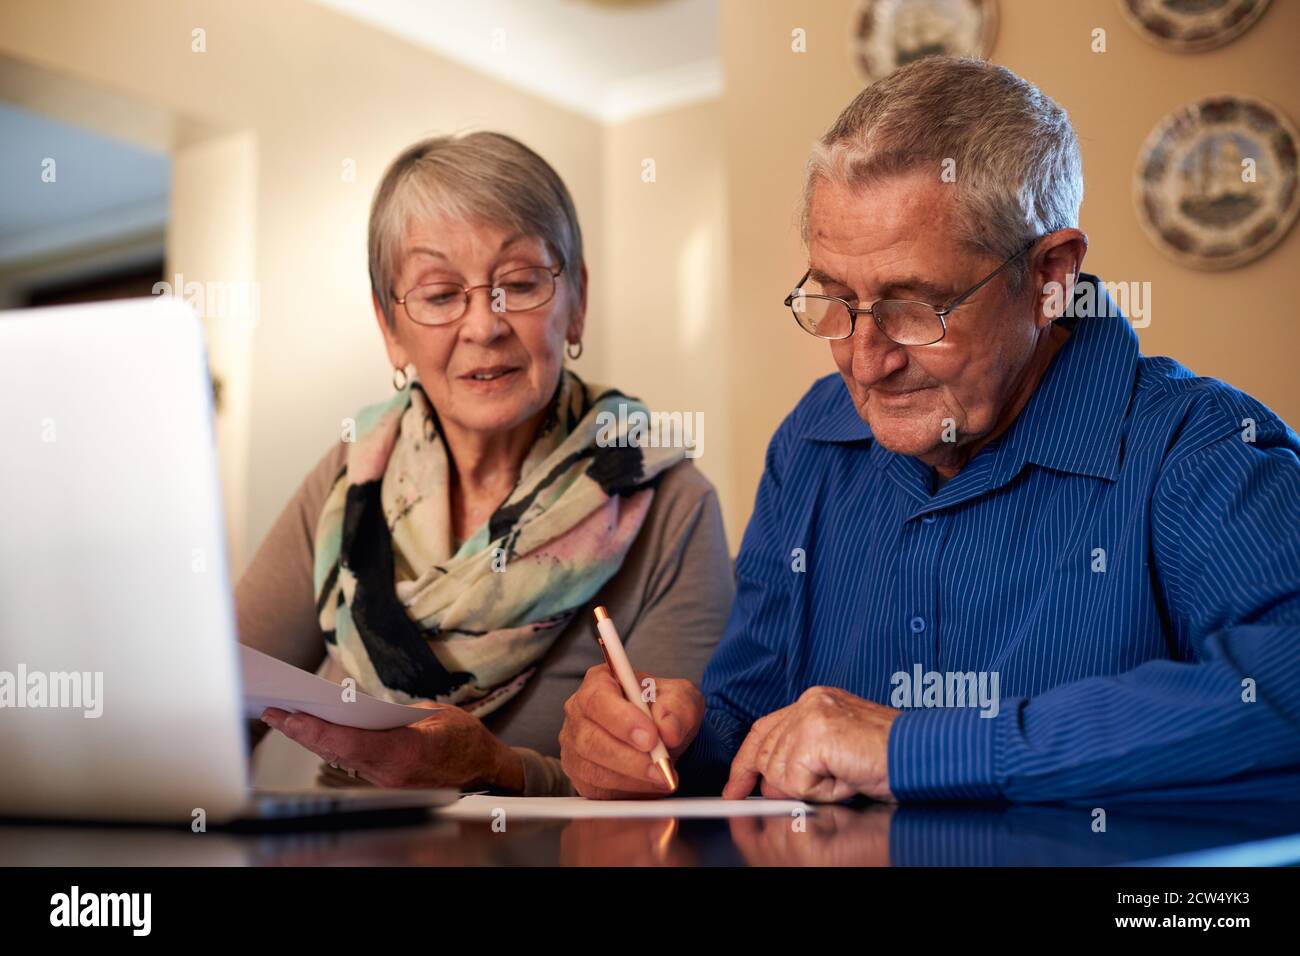 Senior Couple At Home Checking Personal Finances On Laptop Stock Photo